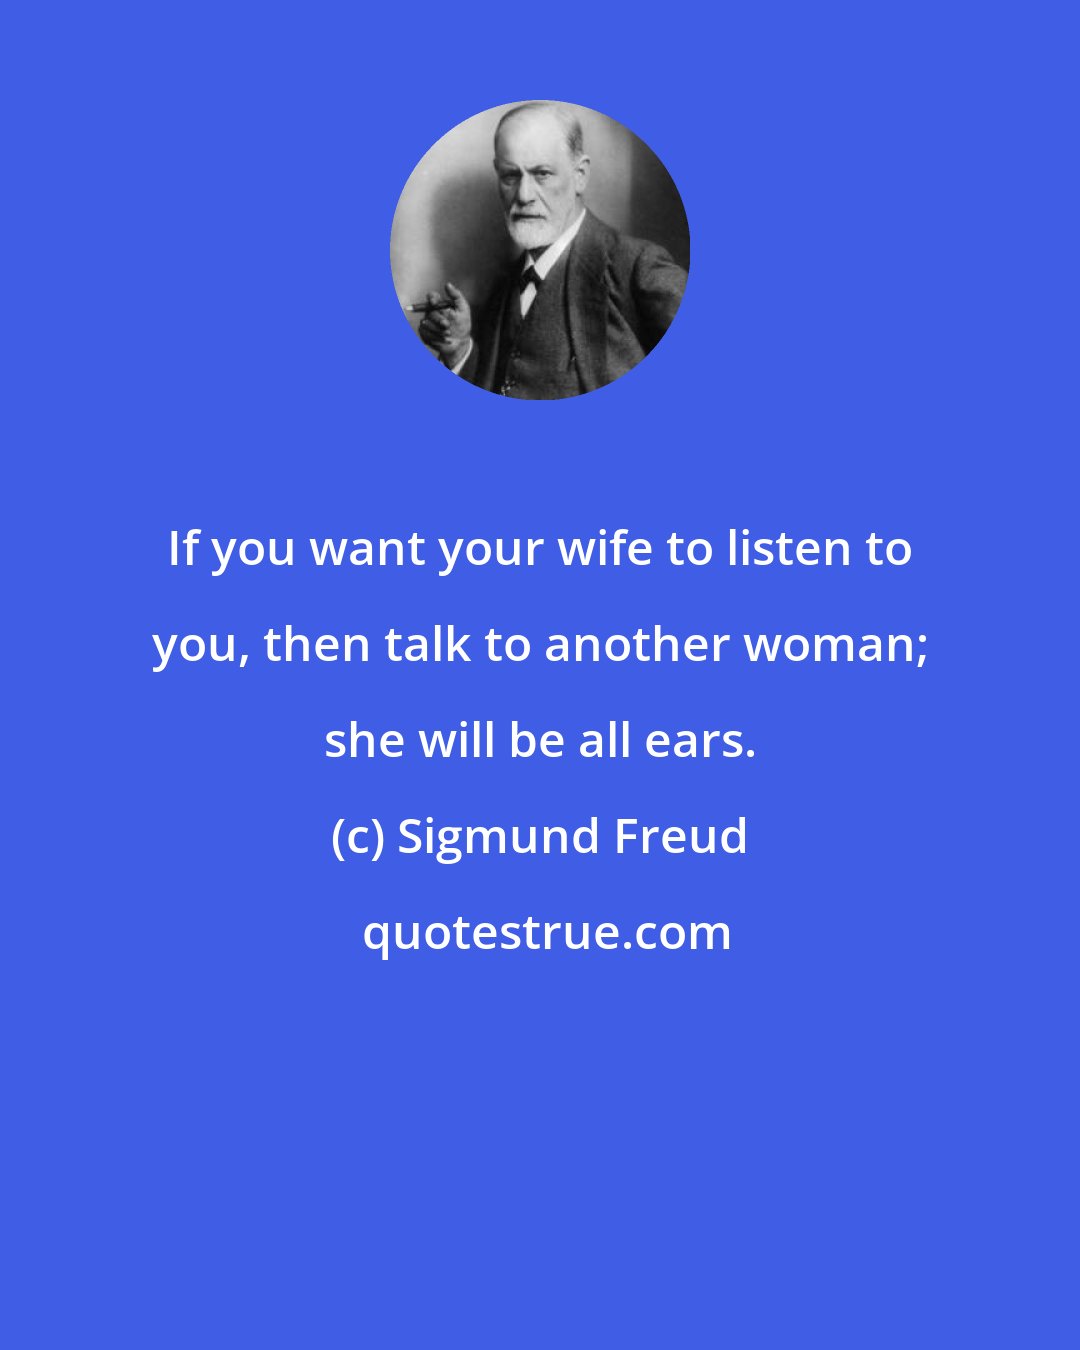 Sigmund Freud: If you want your wife to listen to you, then talk to another woman; she will be all ears.